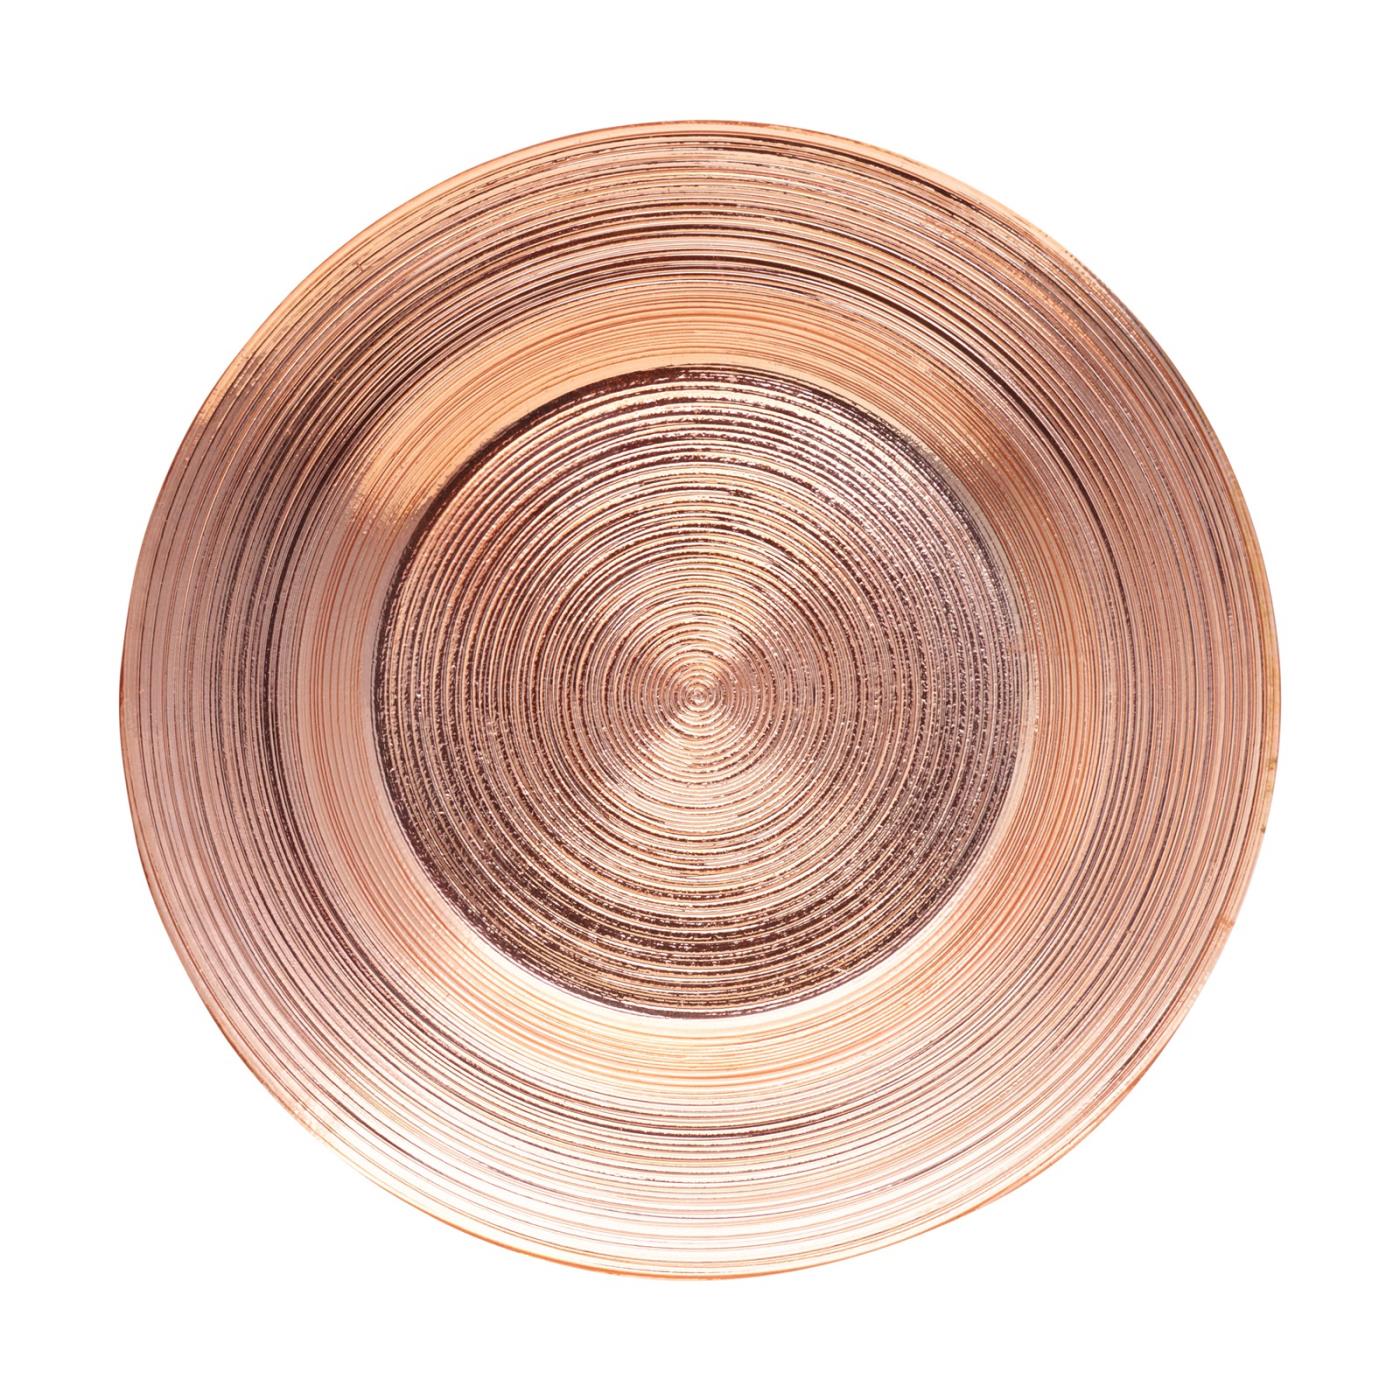 Copper Ring Glass Charger - 10.25"